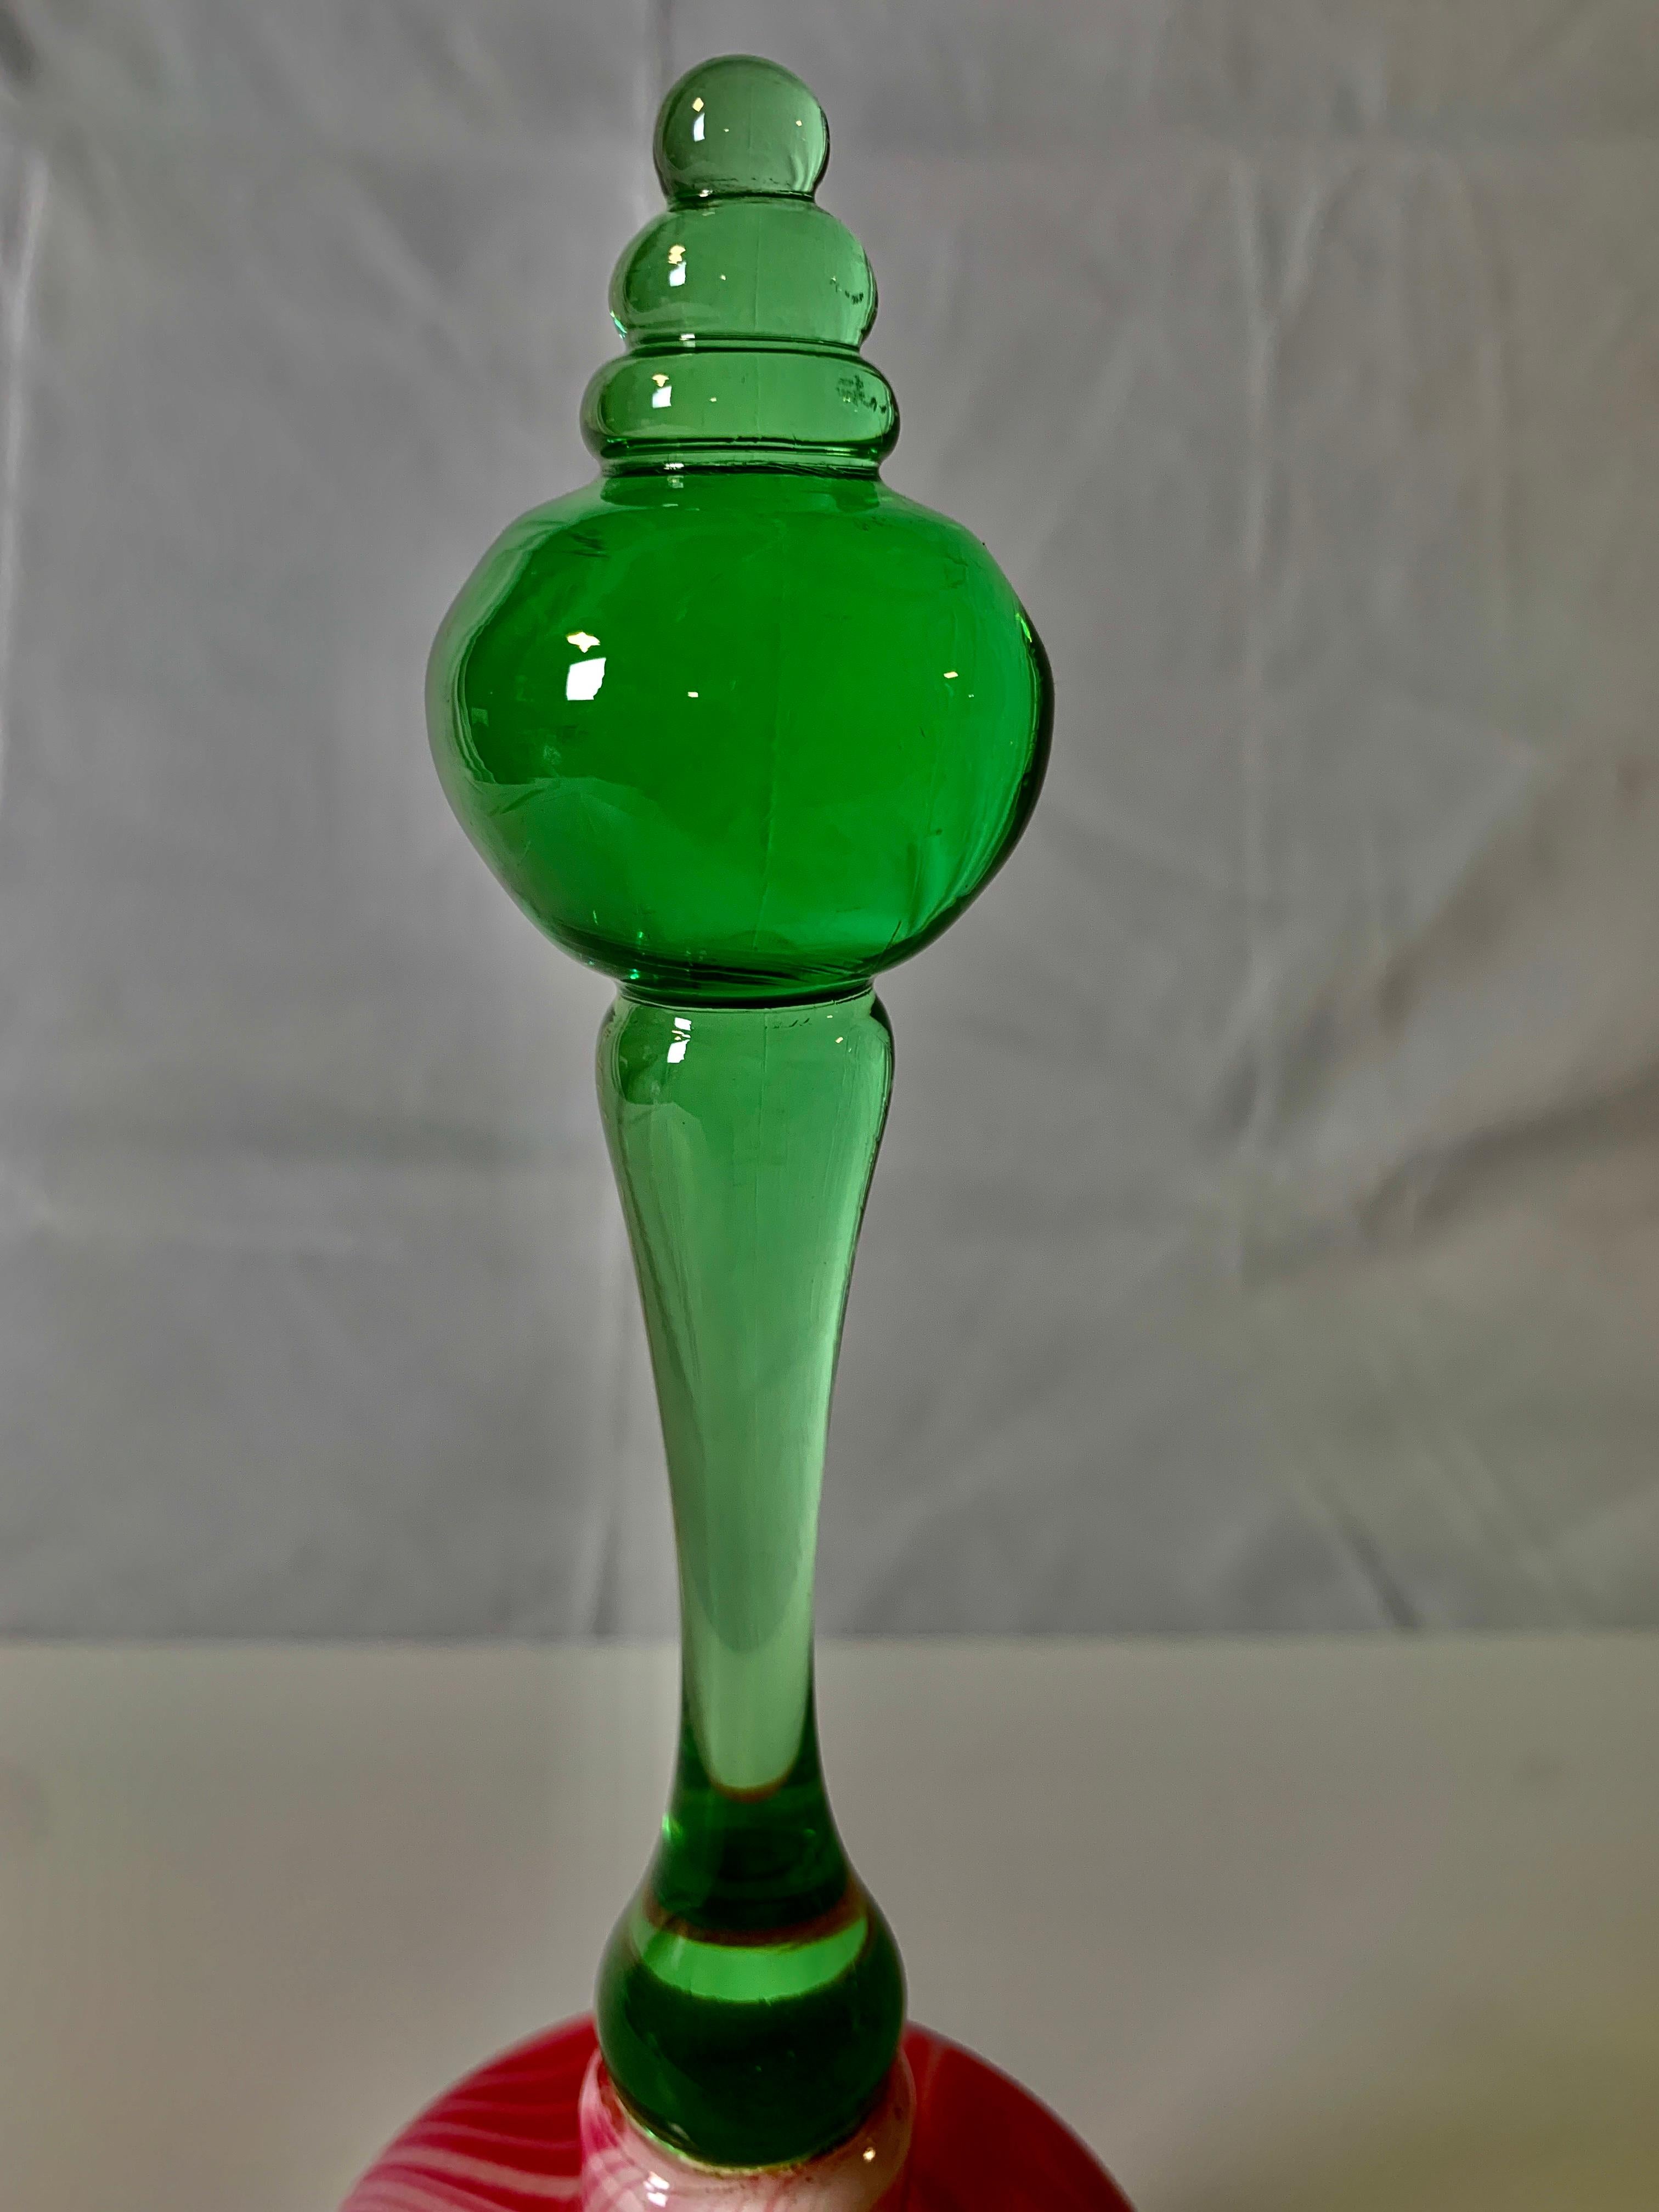 This bell is red and white with a green handle. It is perfect for Christmas.
Made in the Nailsea glassworks in England circa 1840 the blown glass is colored with red and white marbling and is elegantly shaped. It has an exquisite forest green glass